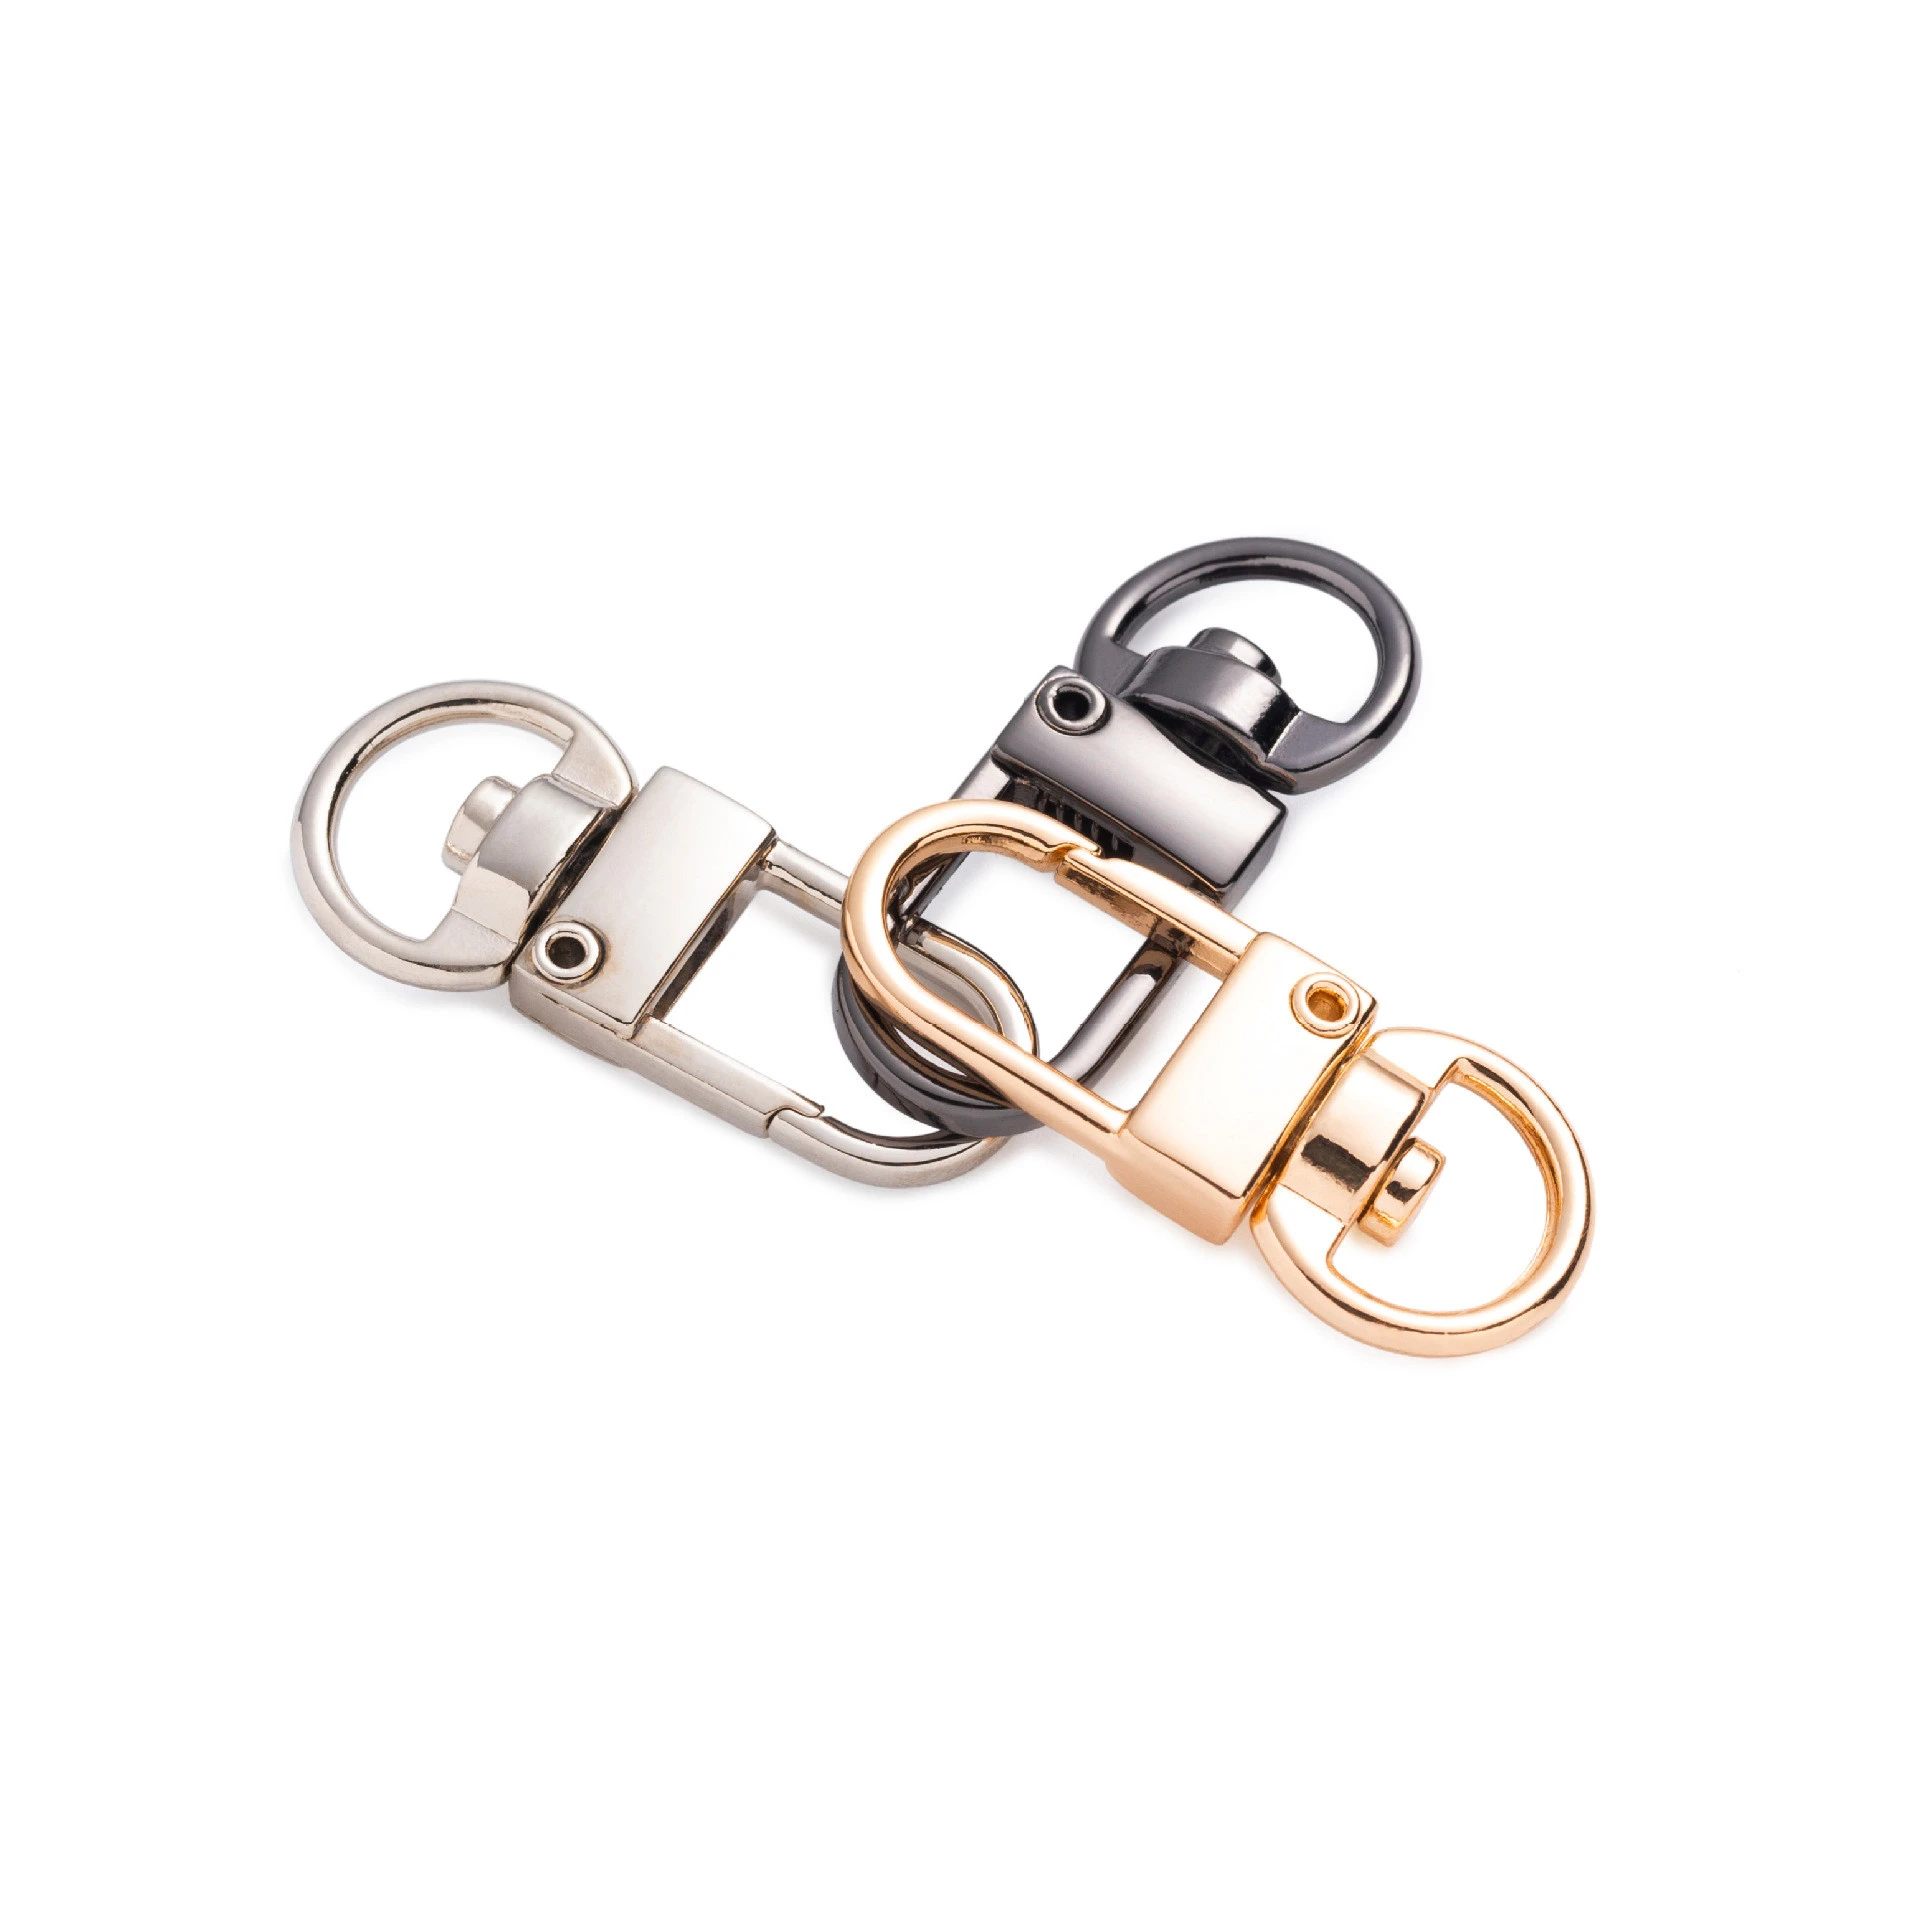 Zinc Alloy Accessories best Selling Hook with swivel Buckle snap Hook bag Accessories